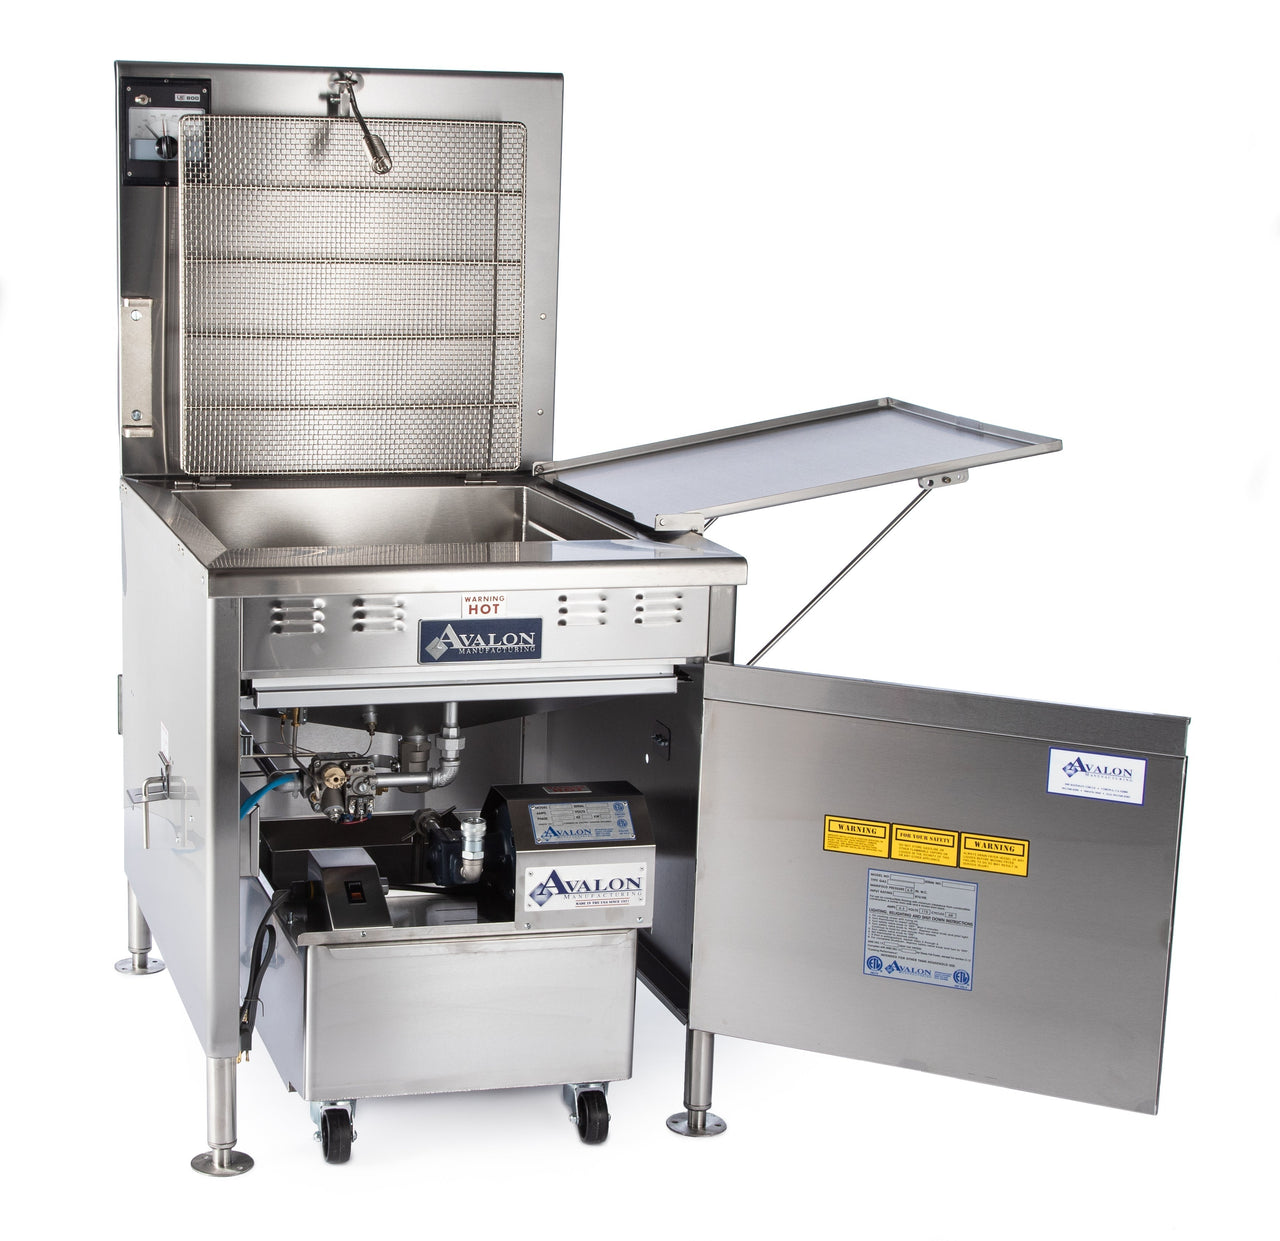 Avalon 18" x 26" Donut Fryer, Natural Gas, Electronic Ignition, Left Side Drain Board with Submerger